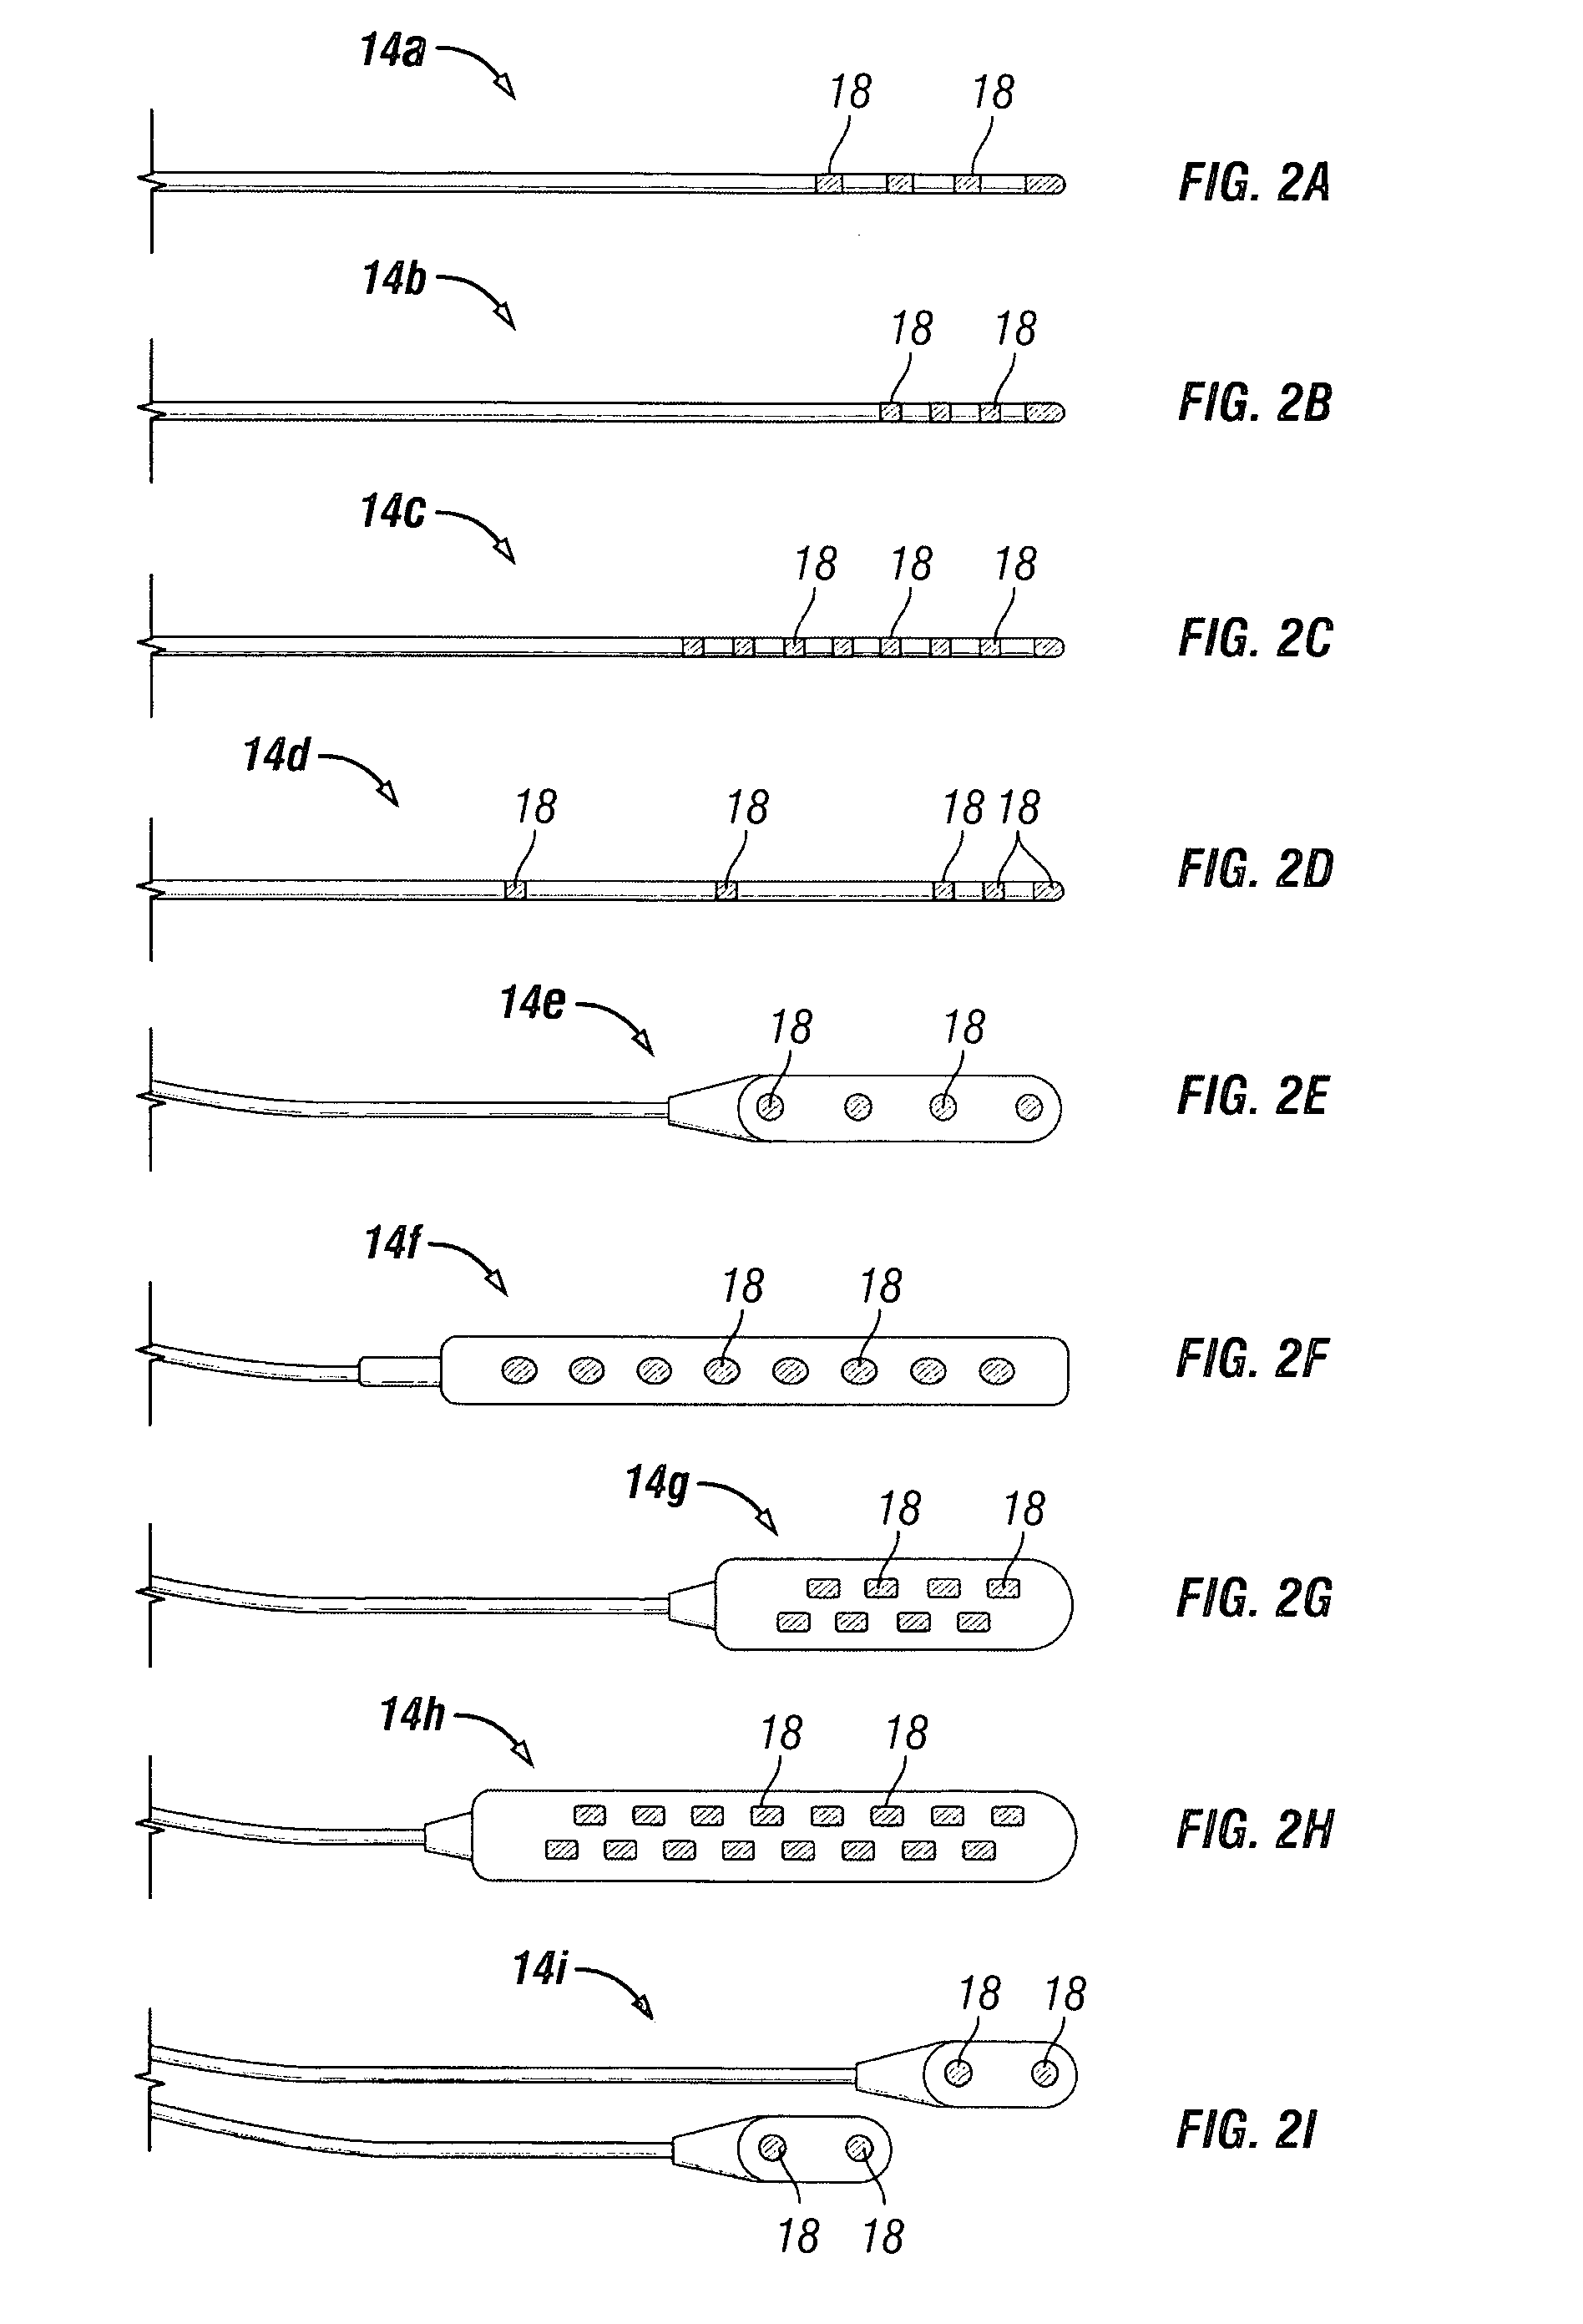 Stimulation system and method for treating a neurological disorder